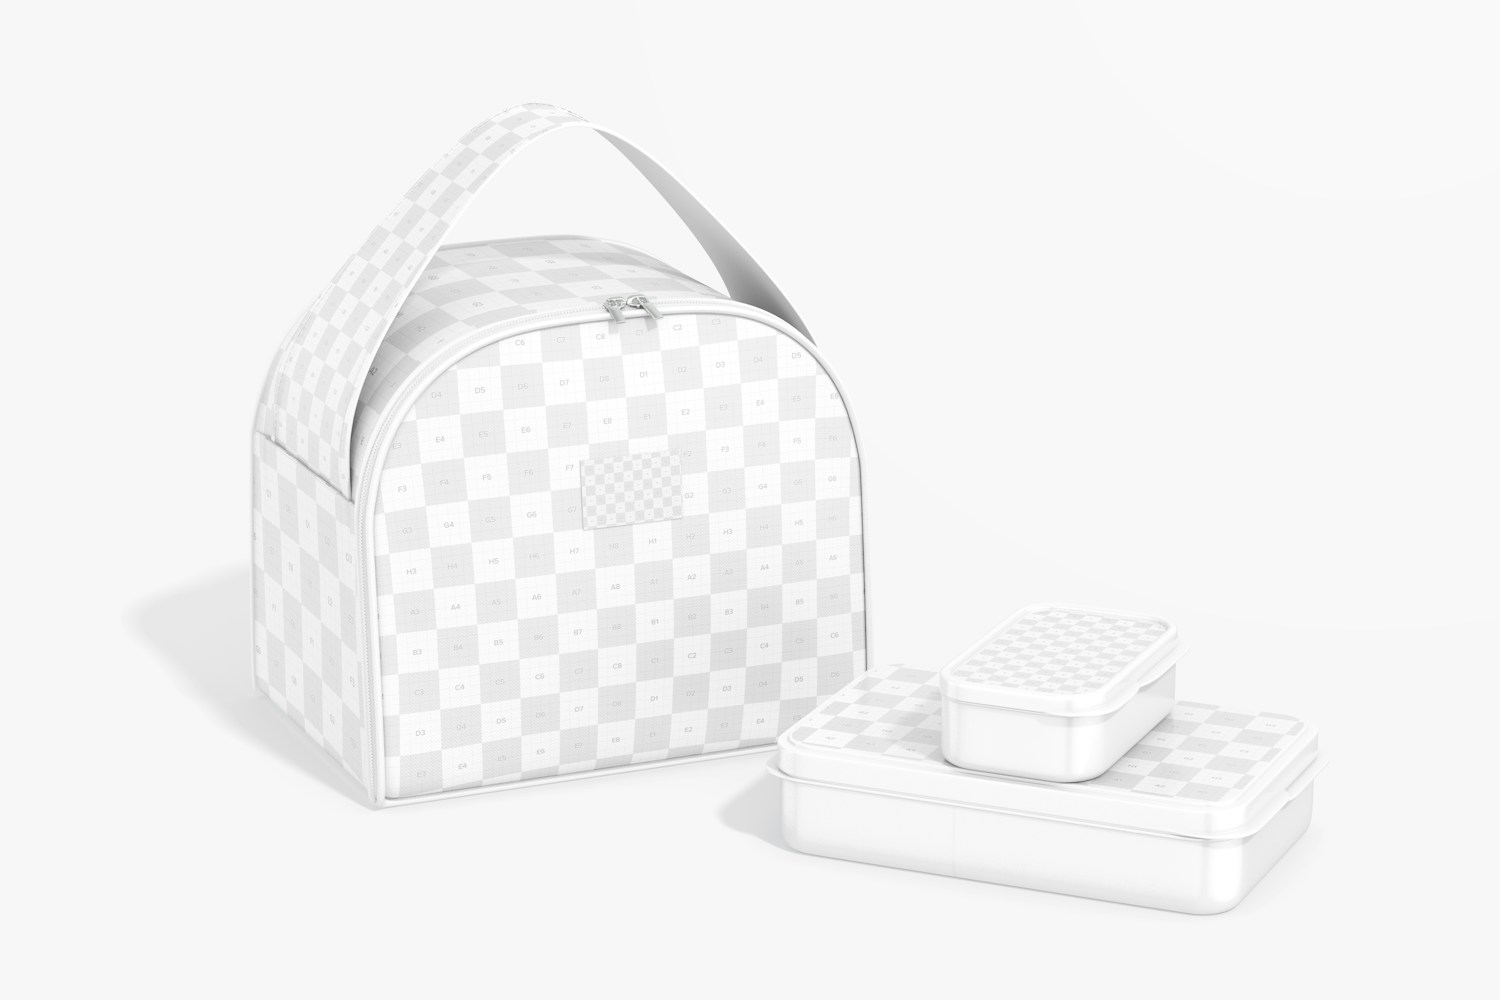 Lunch Cooler Bags with Containers Mockup